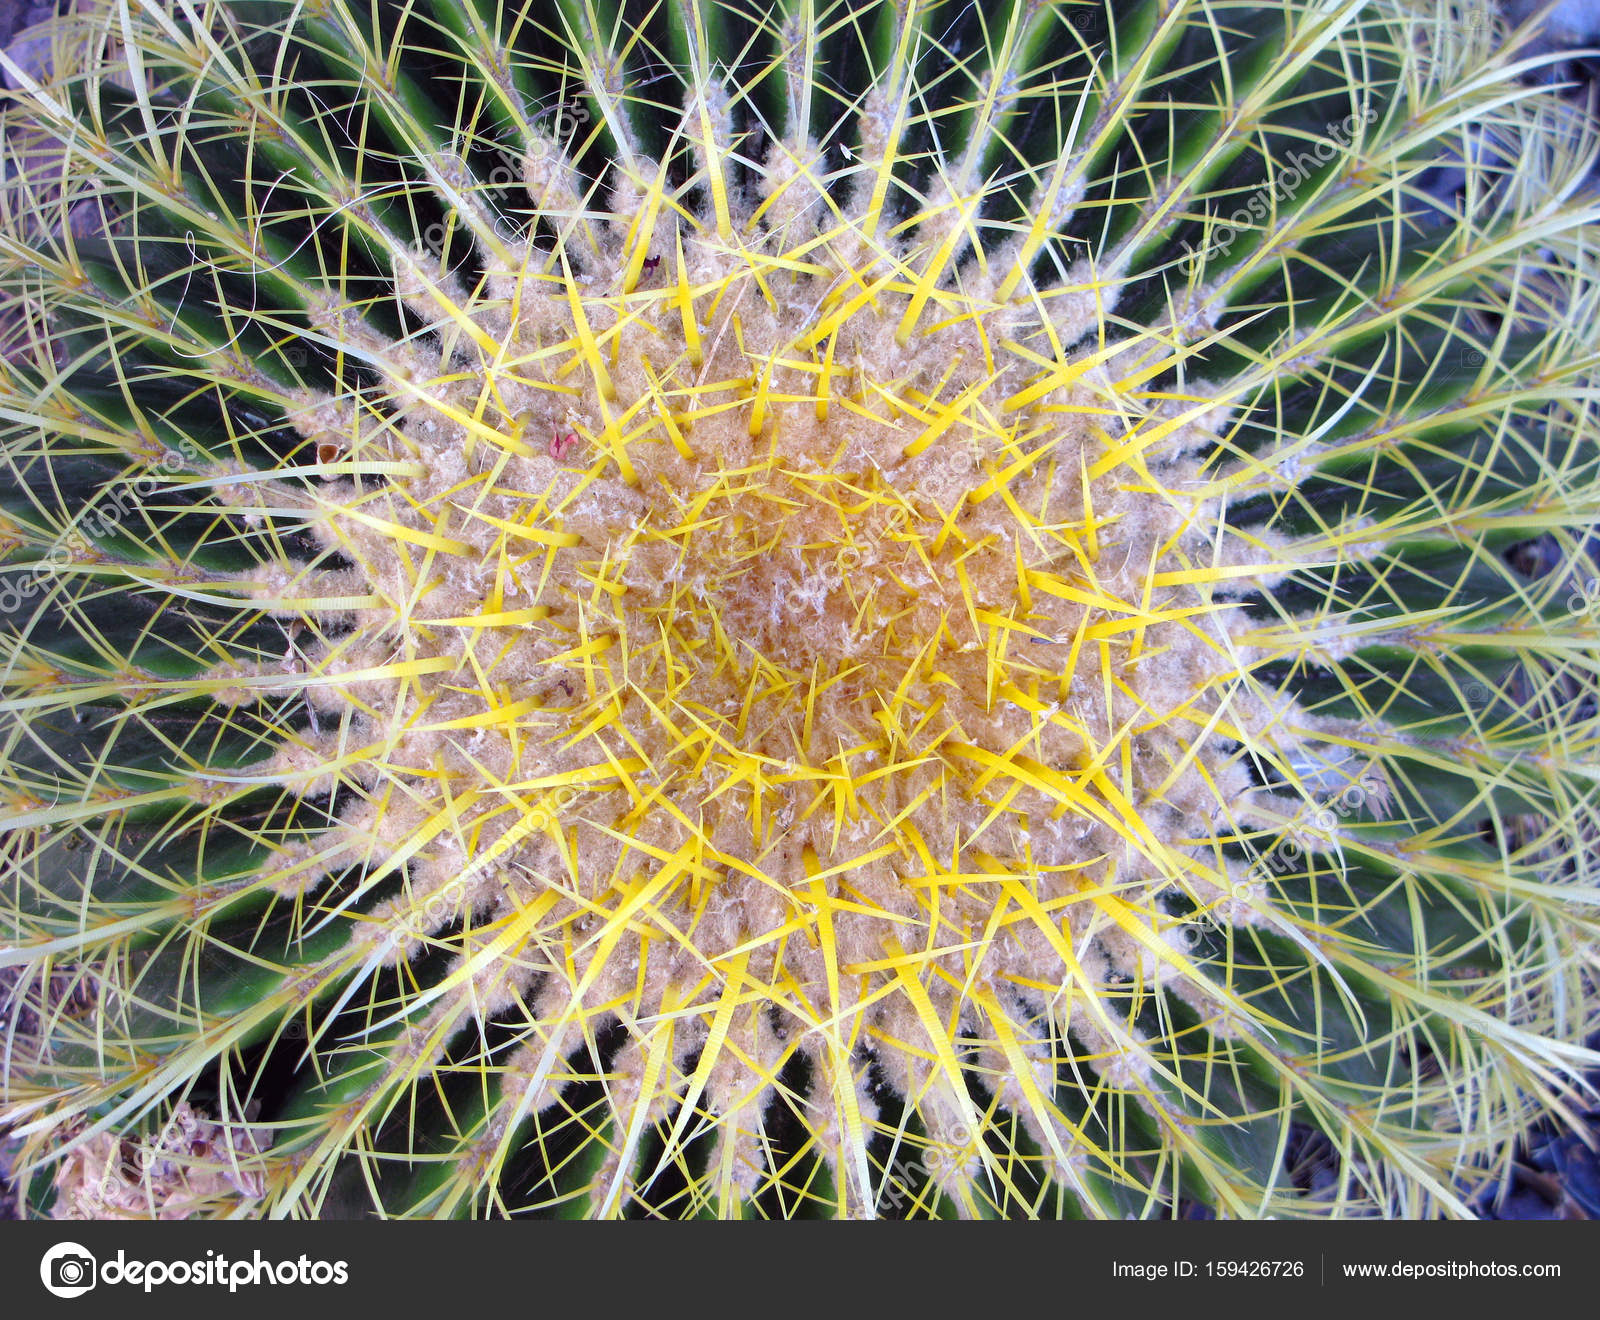 Thorny Cactus Background — Stock Photo © Foto.Toch #159426726